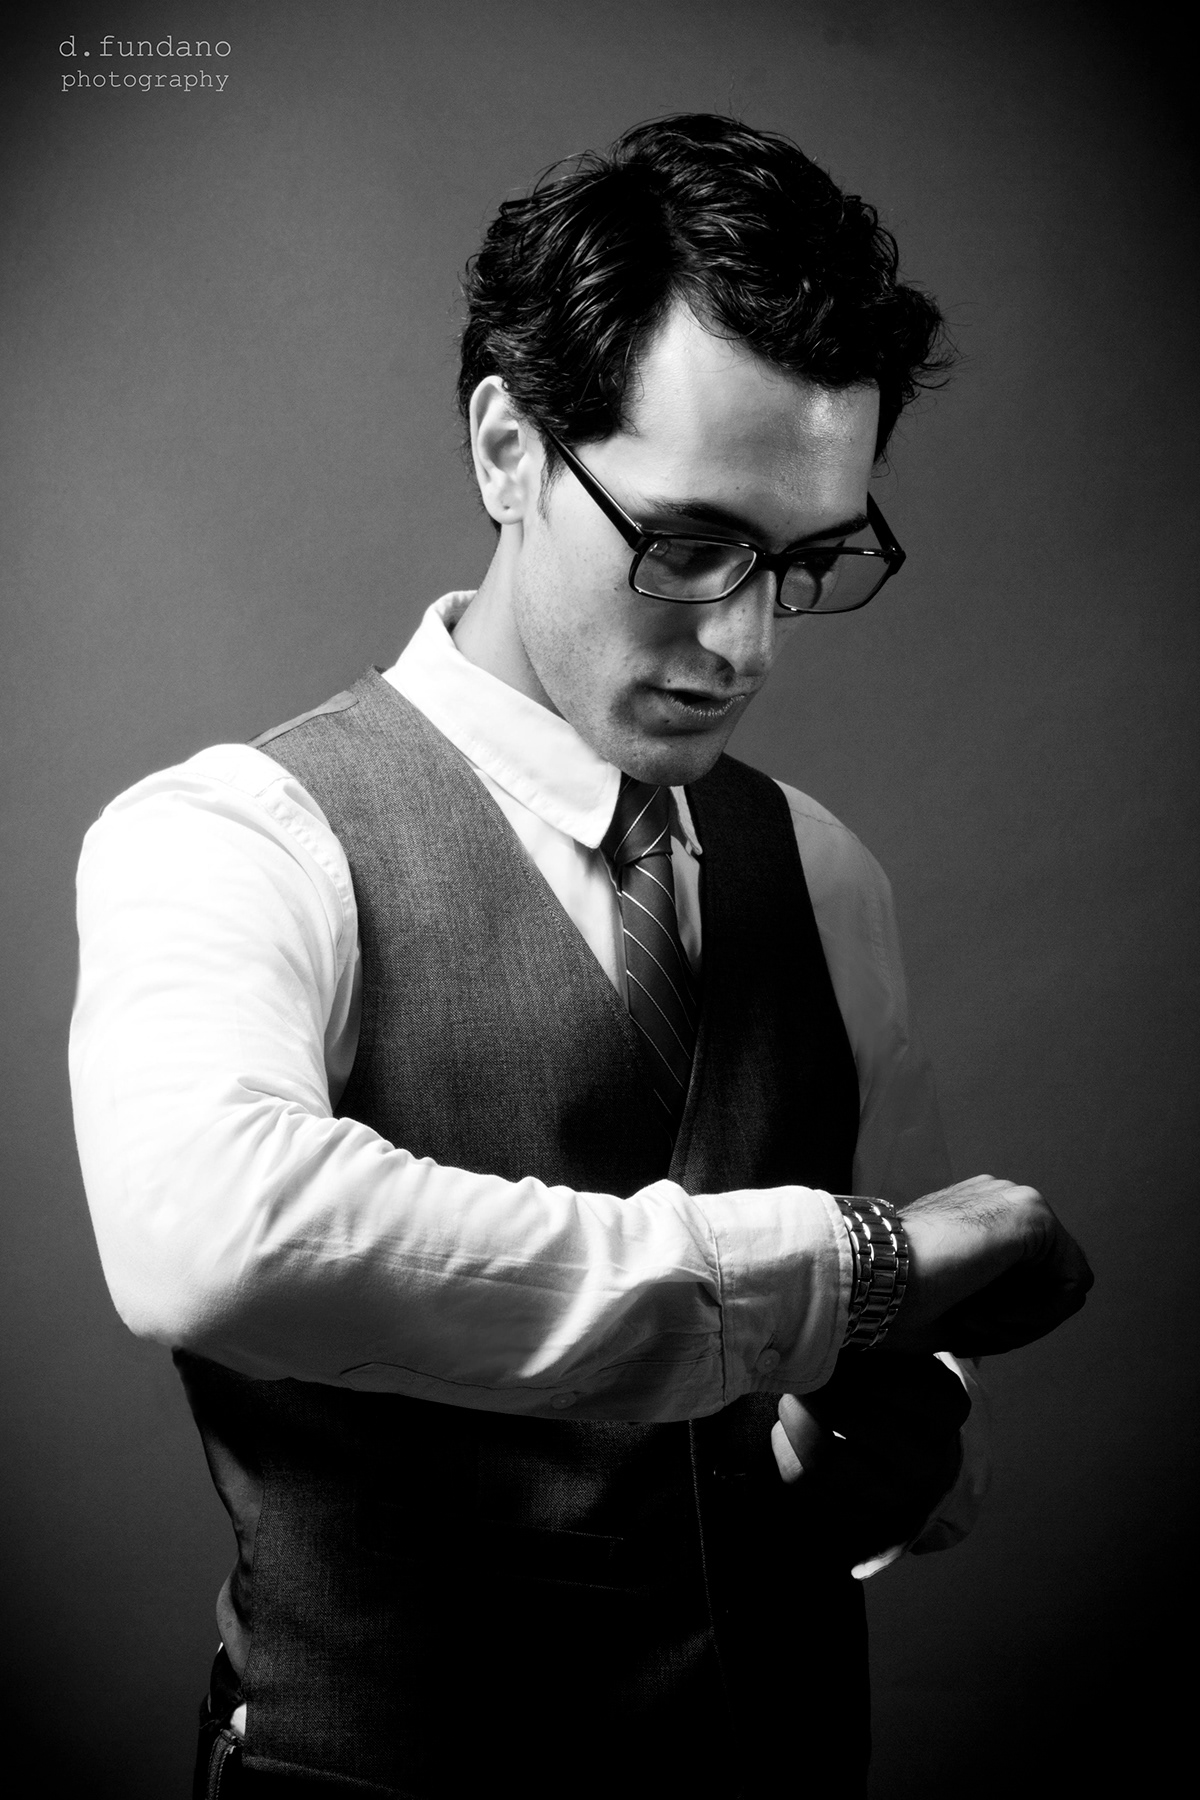 male model suit vest tie high fashion classy black and white b&w